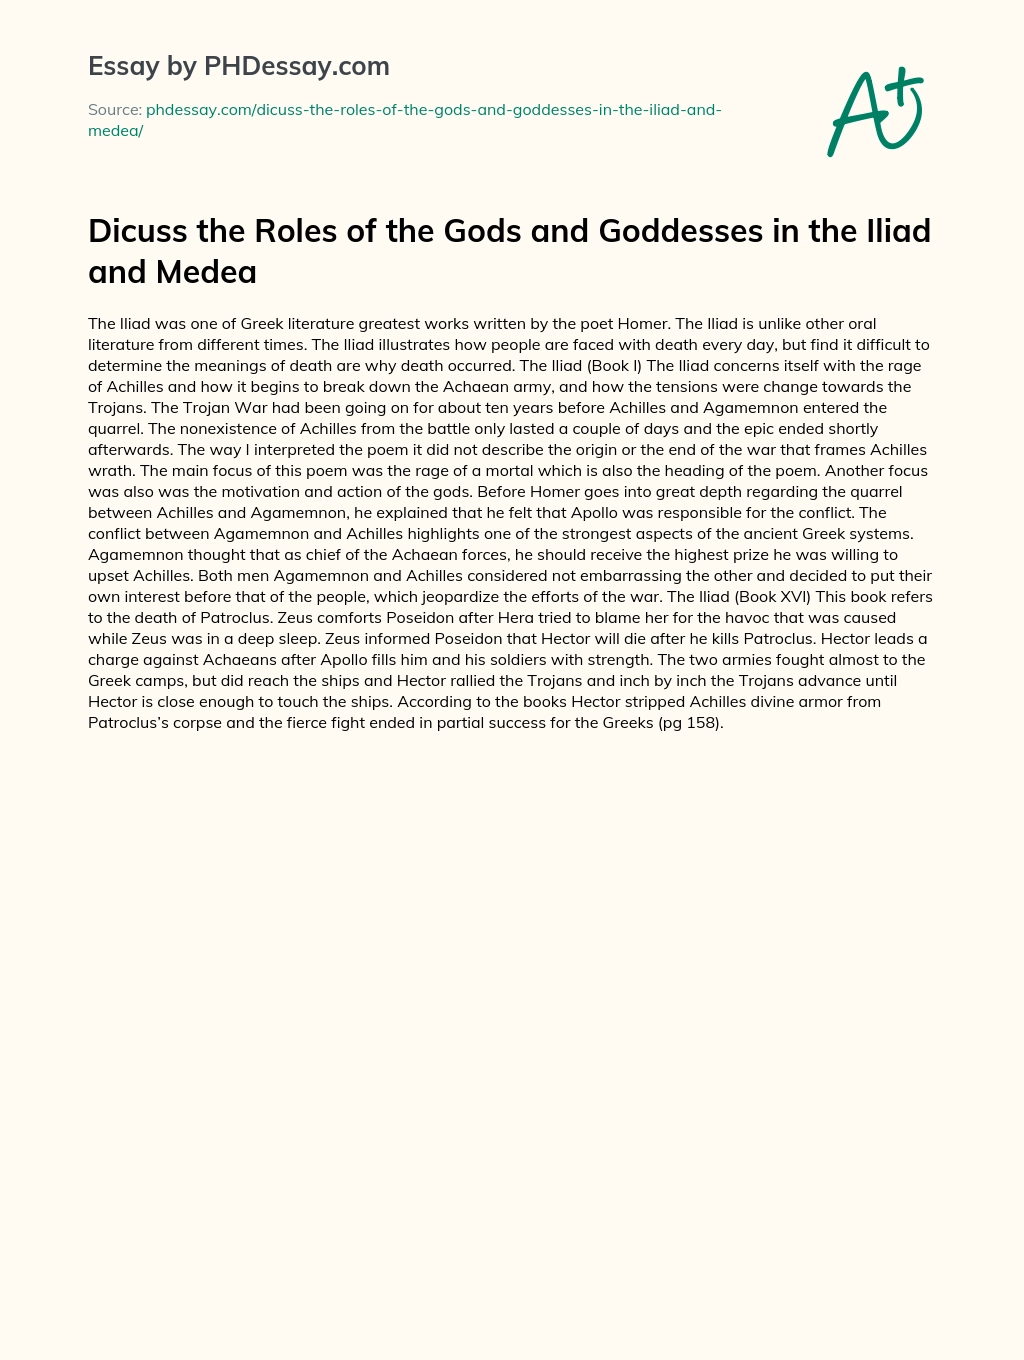 Dicuss the Roles of the Gods and Goddesses in the Iliad and Medea essay